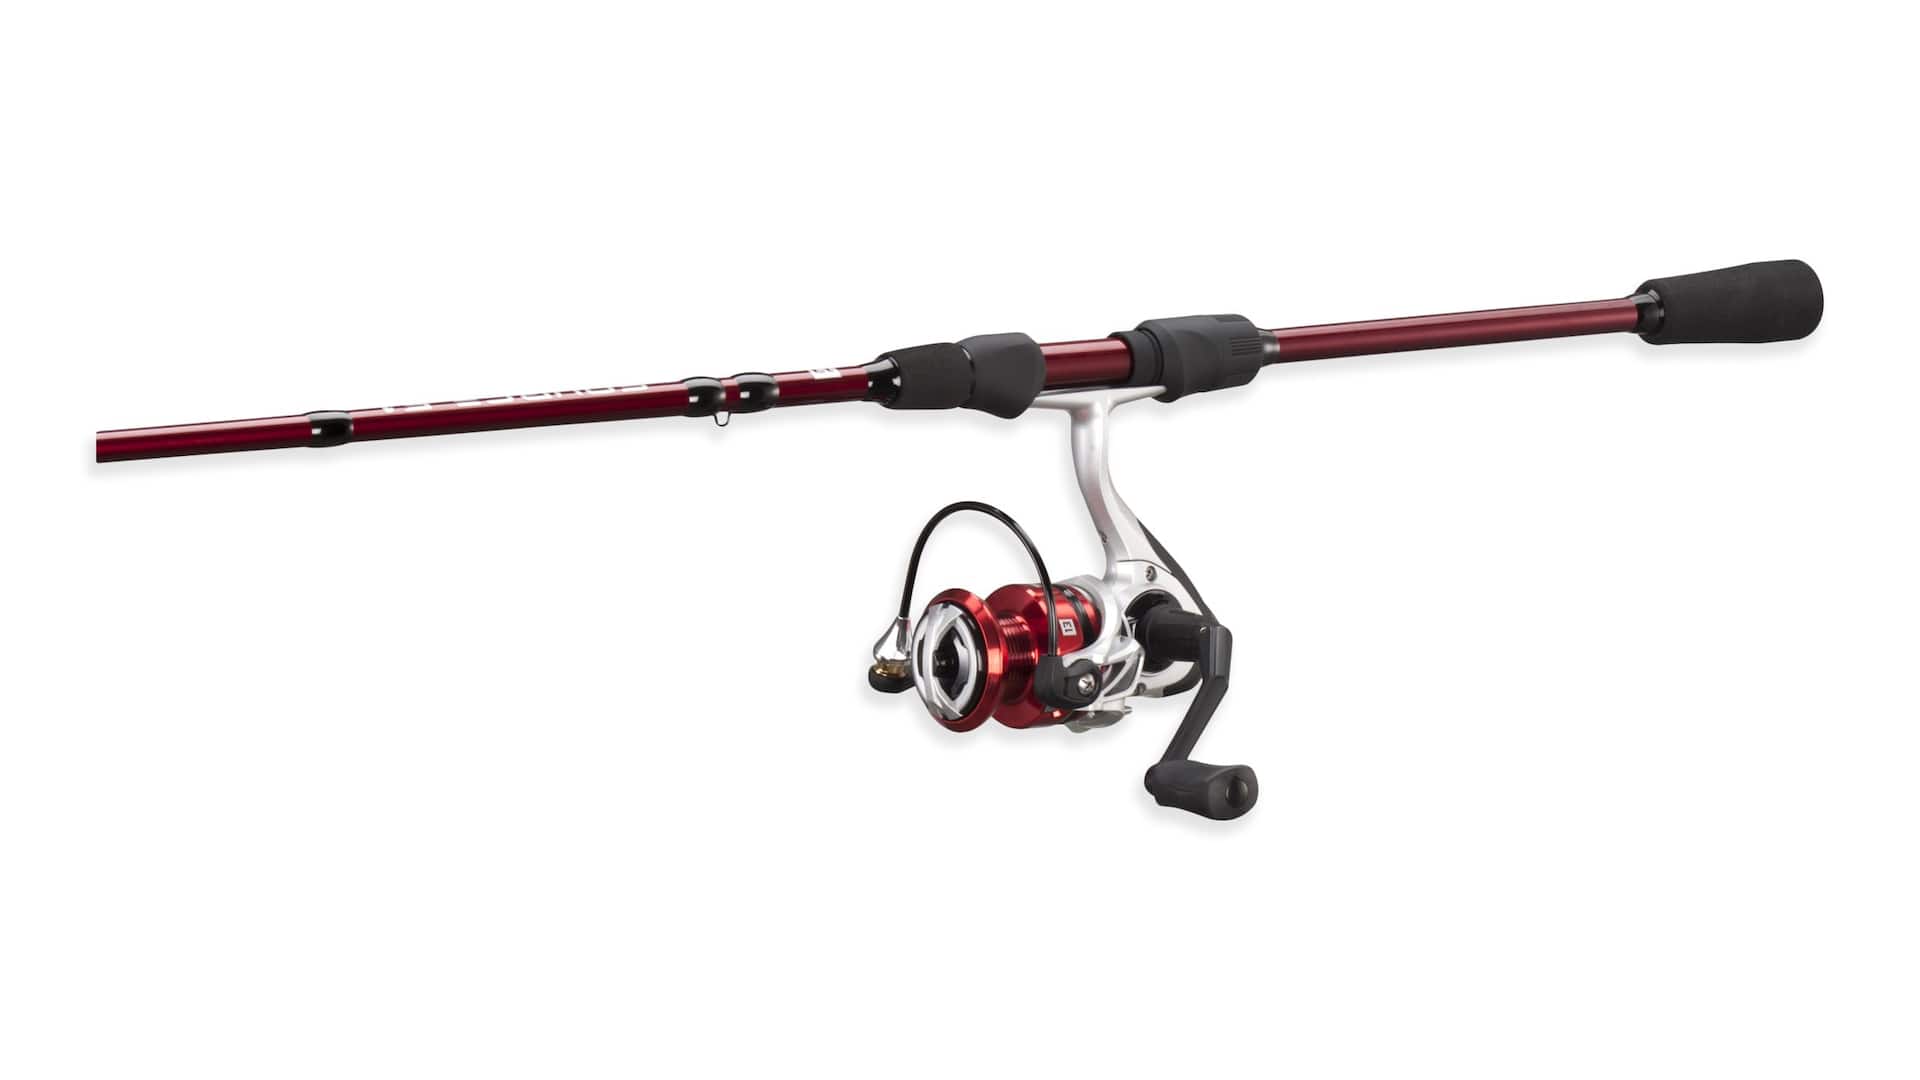 13 Fishing Source F1 Spinning Fishing Reel & Rod Combo, Right Hand/Left  Hand, 7-ft 1-in, Medium